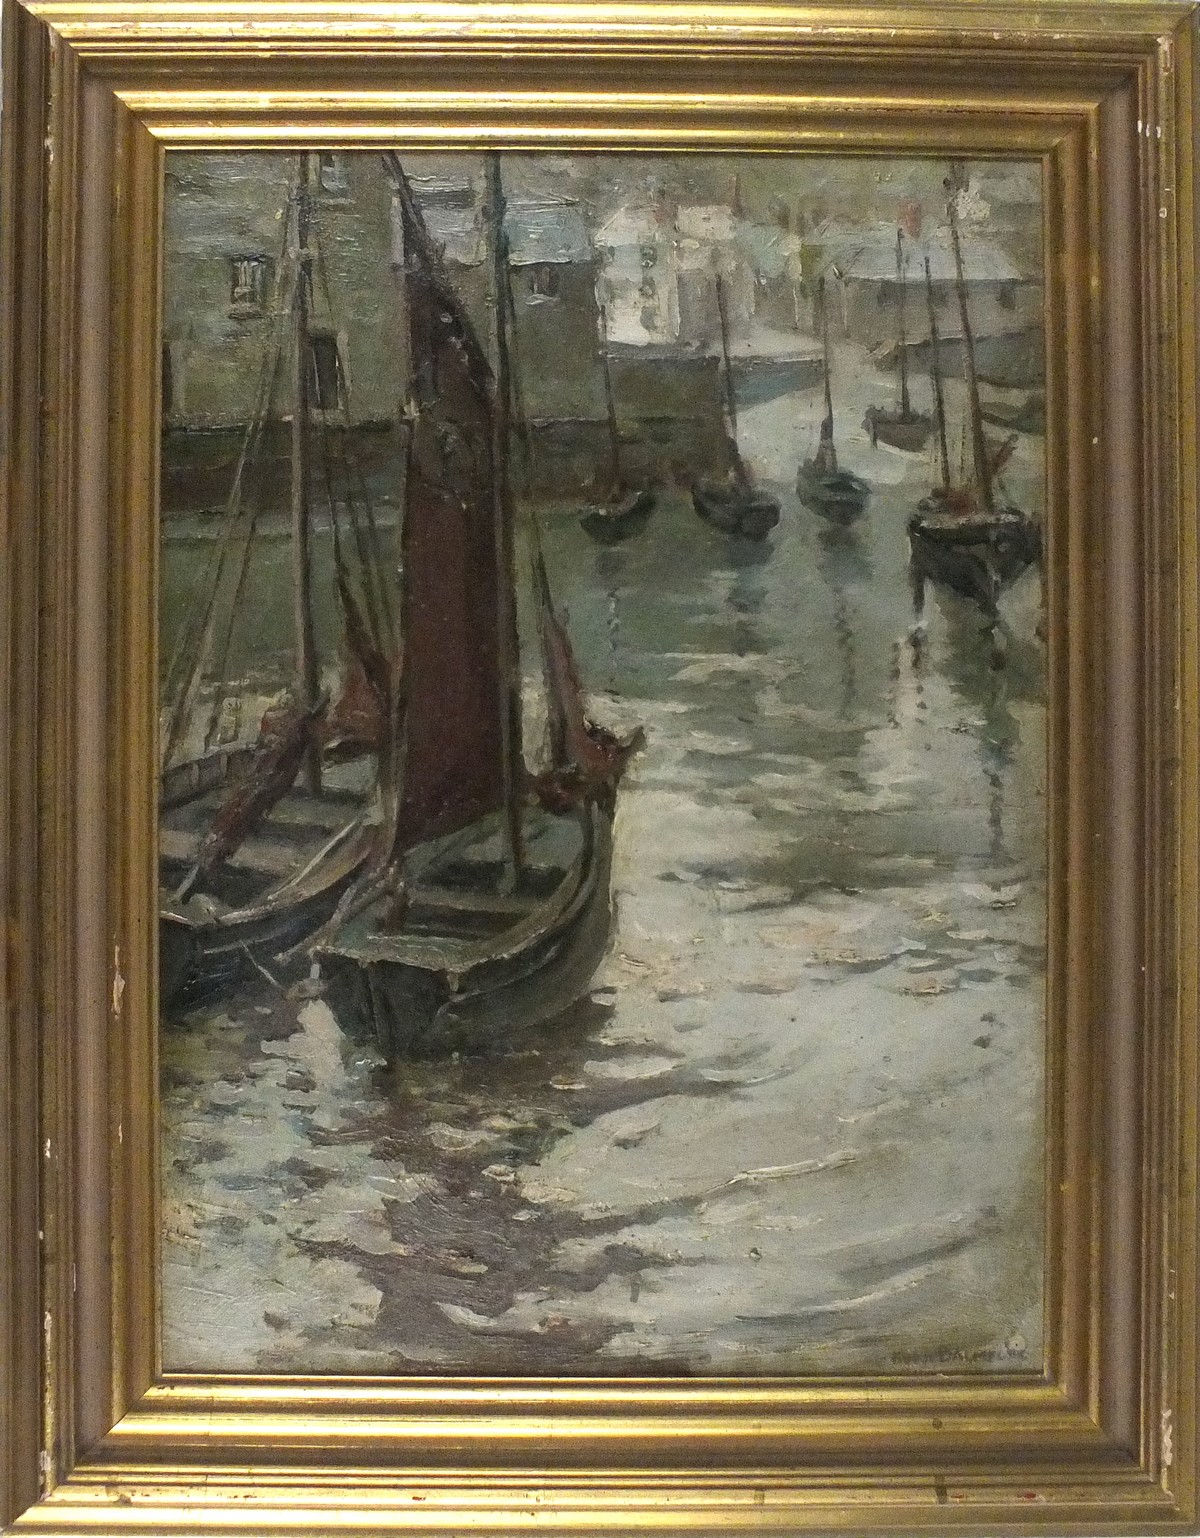 Hurst BALMFORD (British 1871-1950) Quite Harbour - Polperro, Oil on board, Signed lower right, 21. - Image 2 of 2